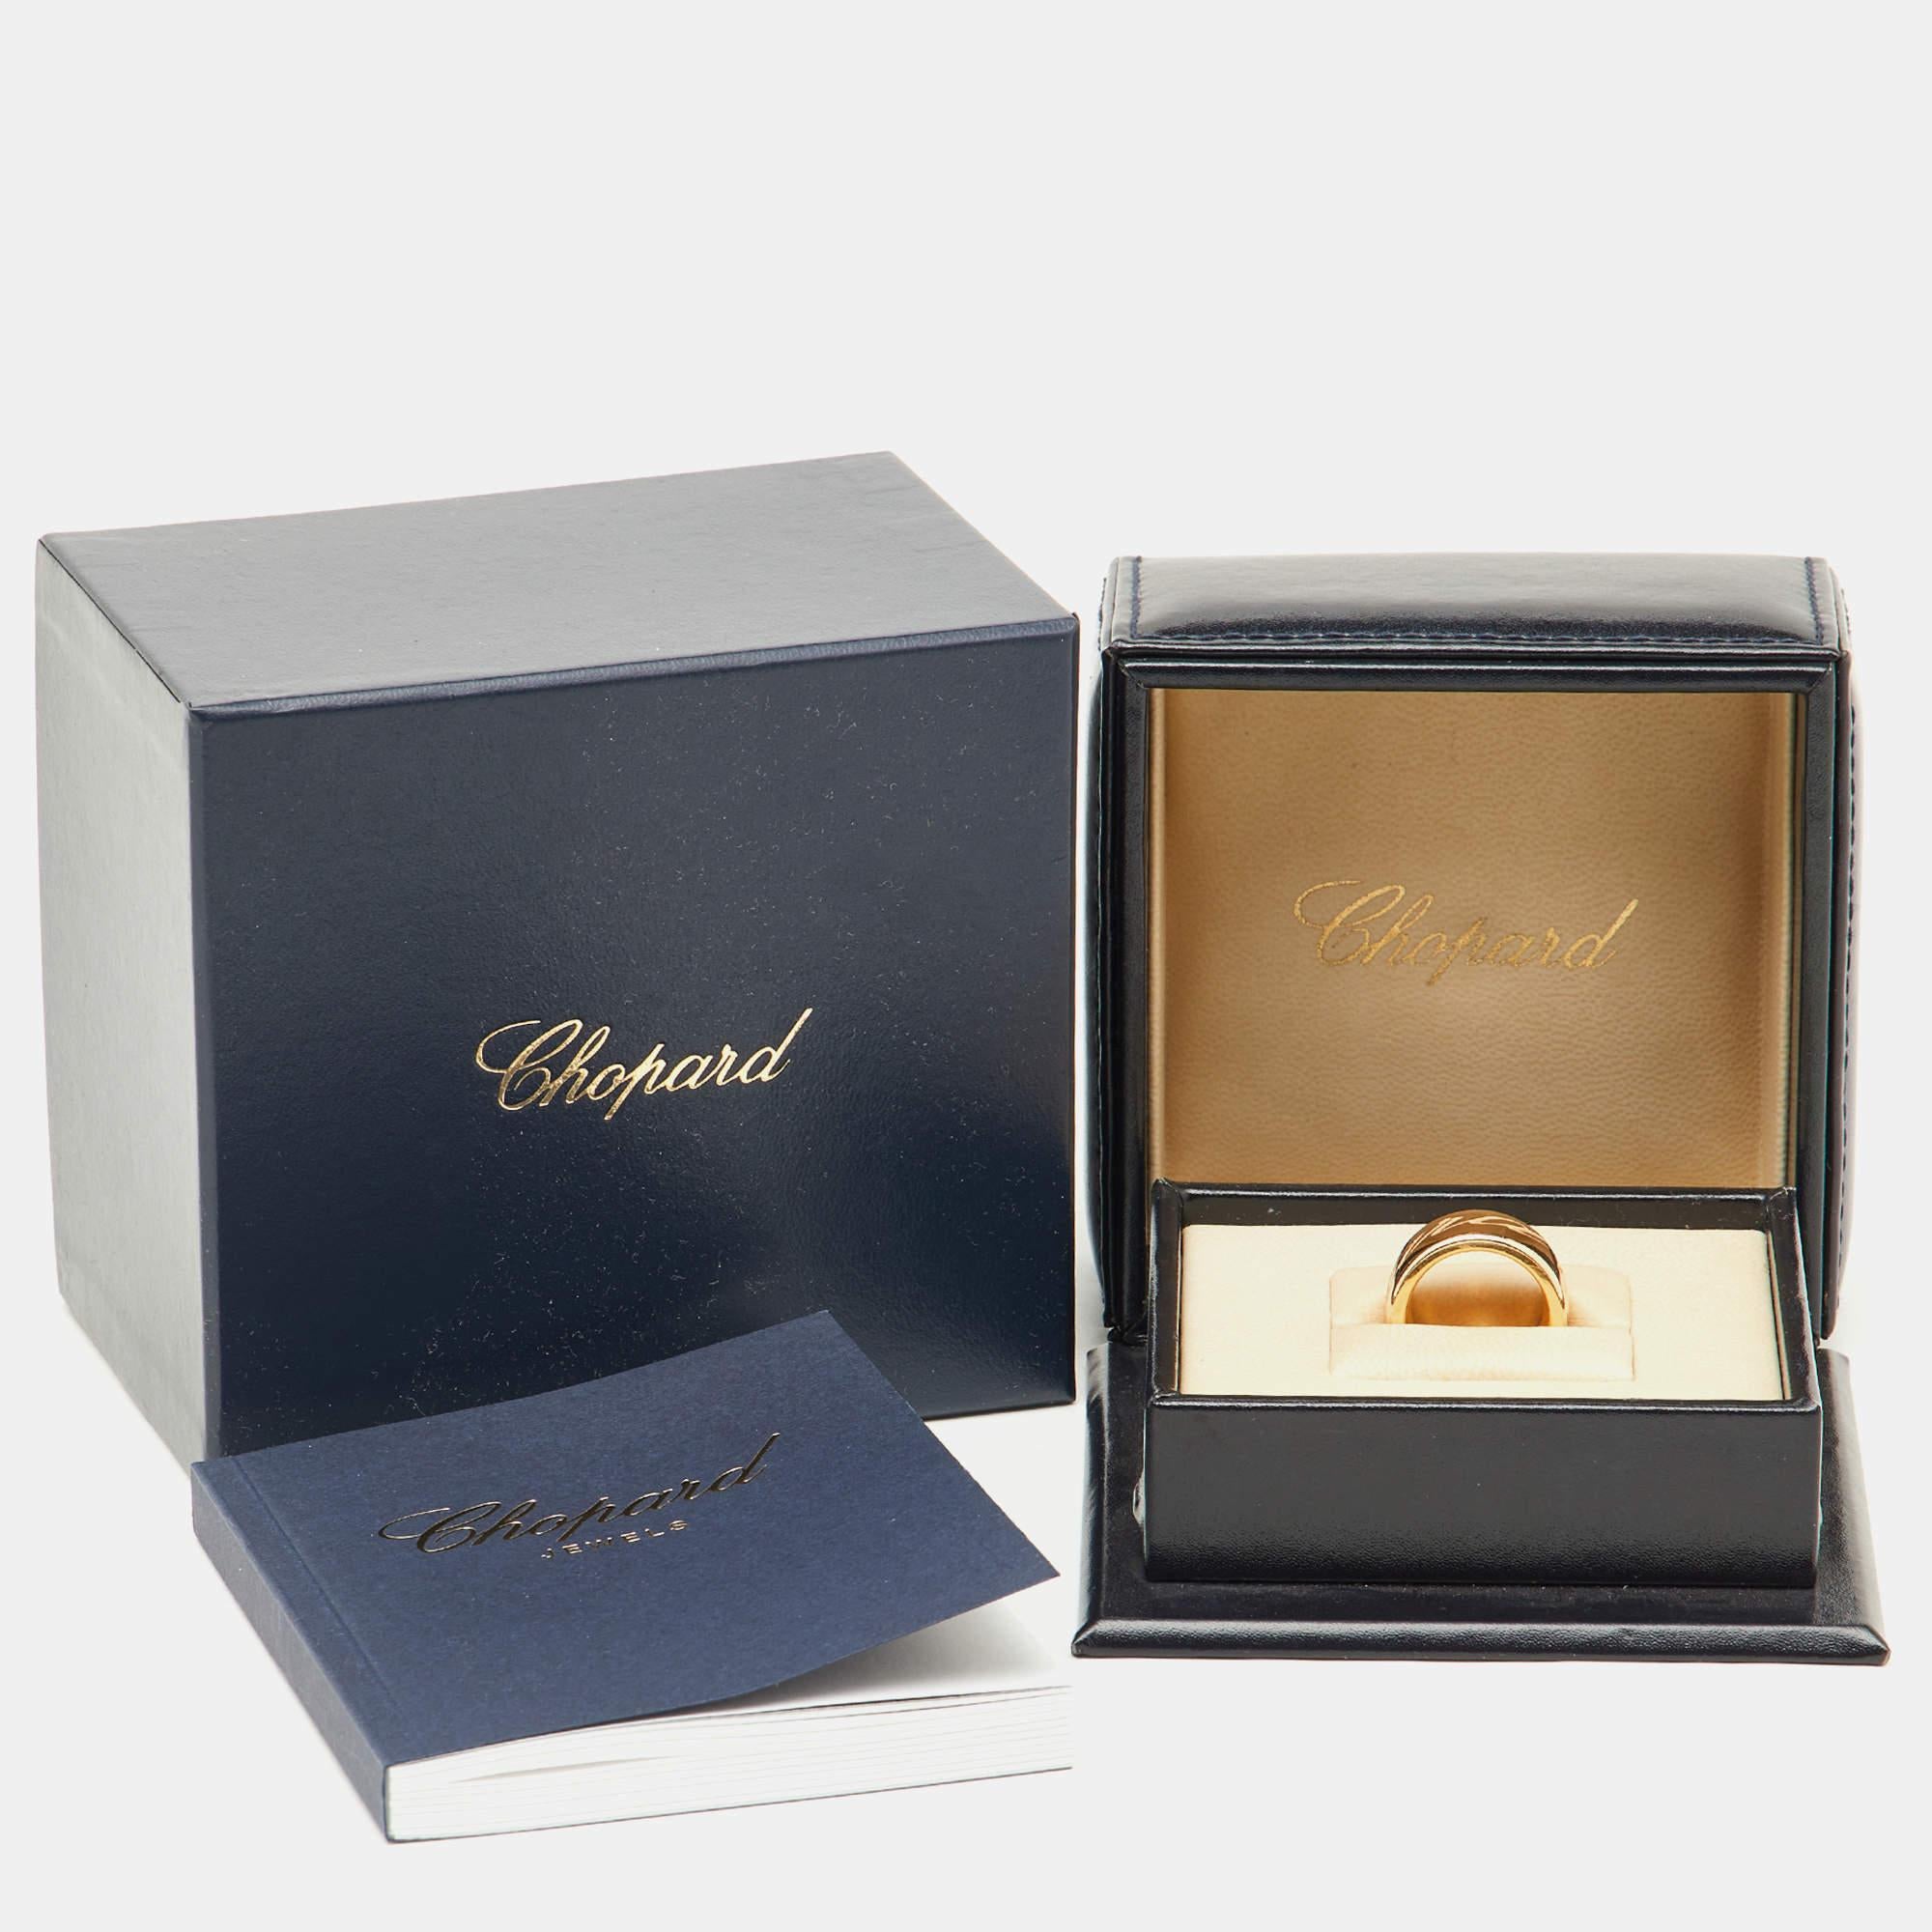 Chopard Chopardissimo Revolving Signature 18k Rose Gold Wide Band Ring Size 52 For Sale 1